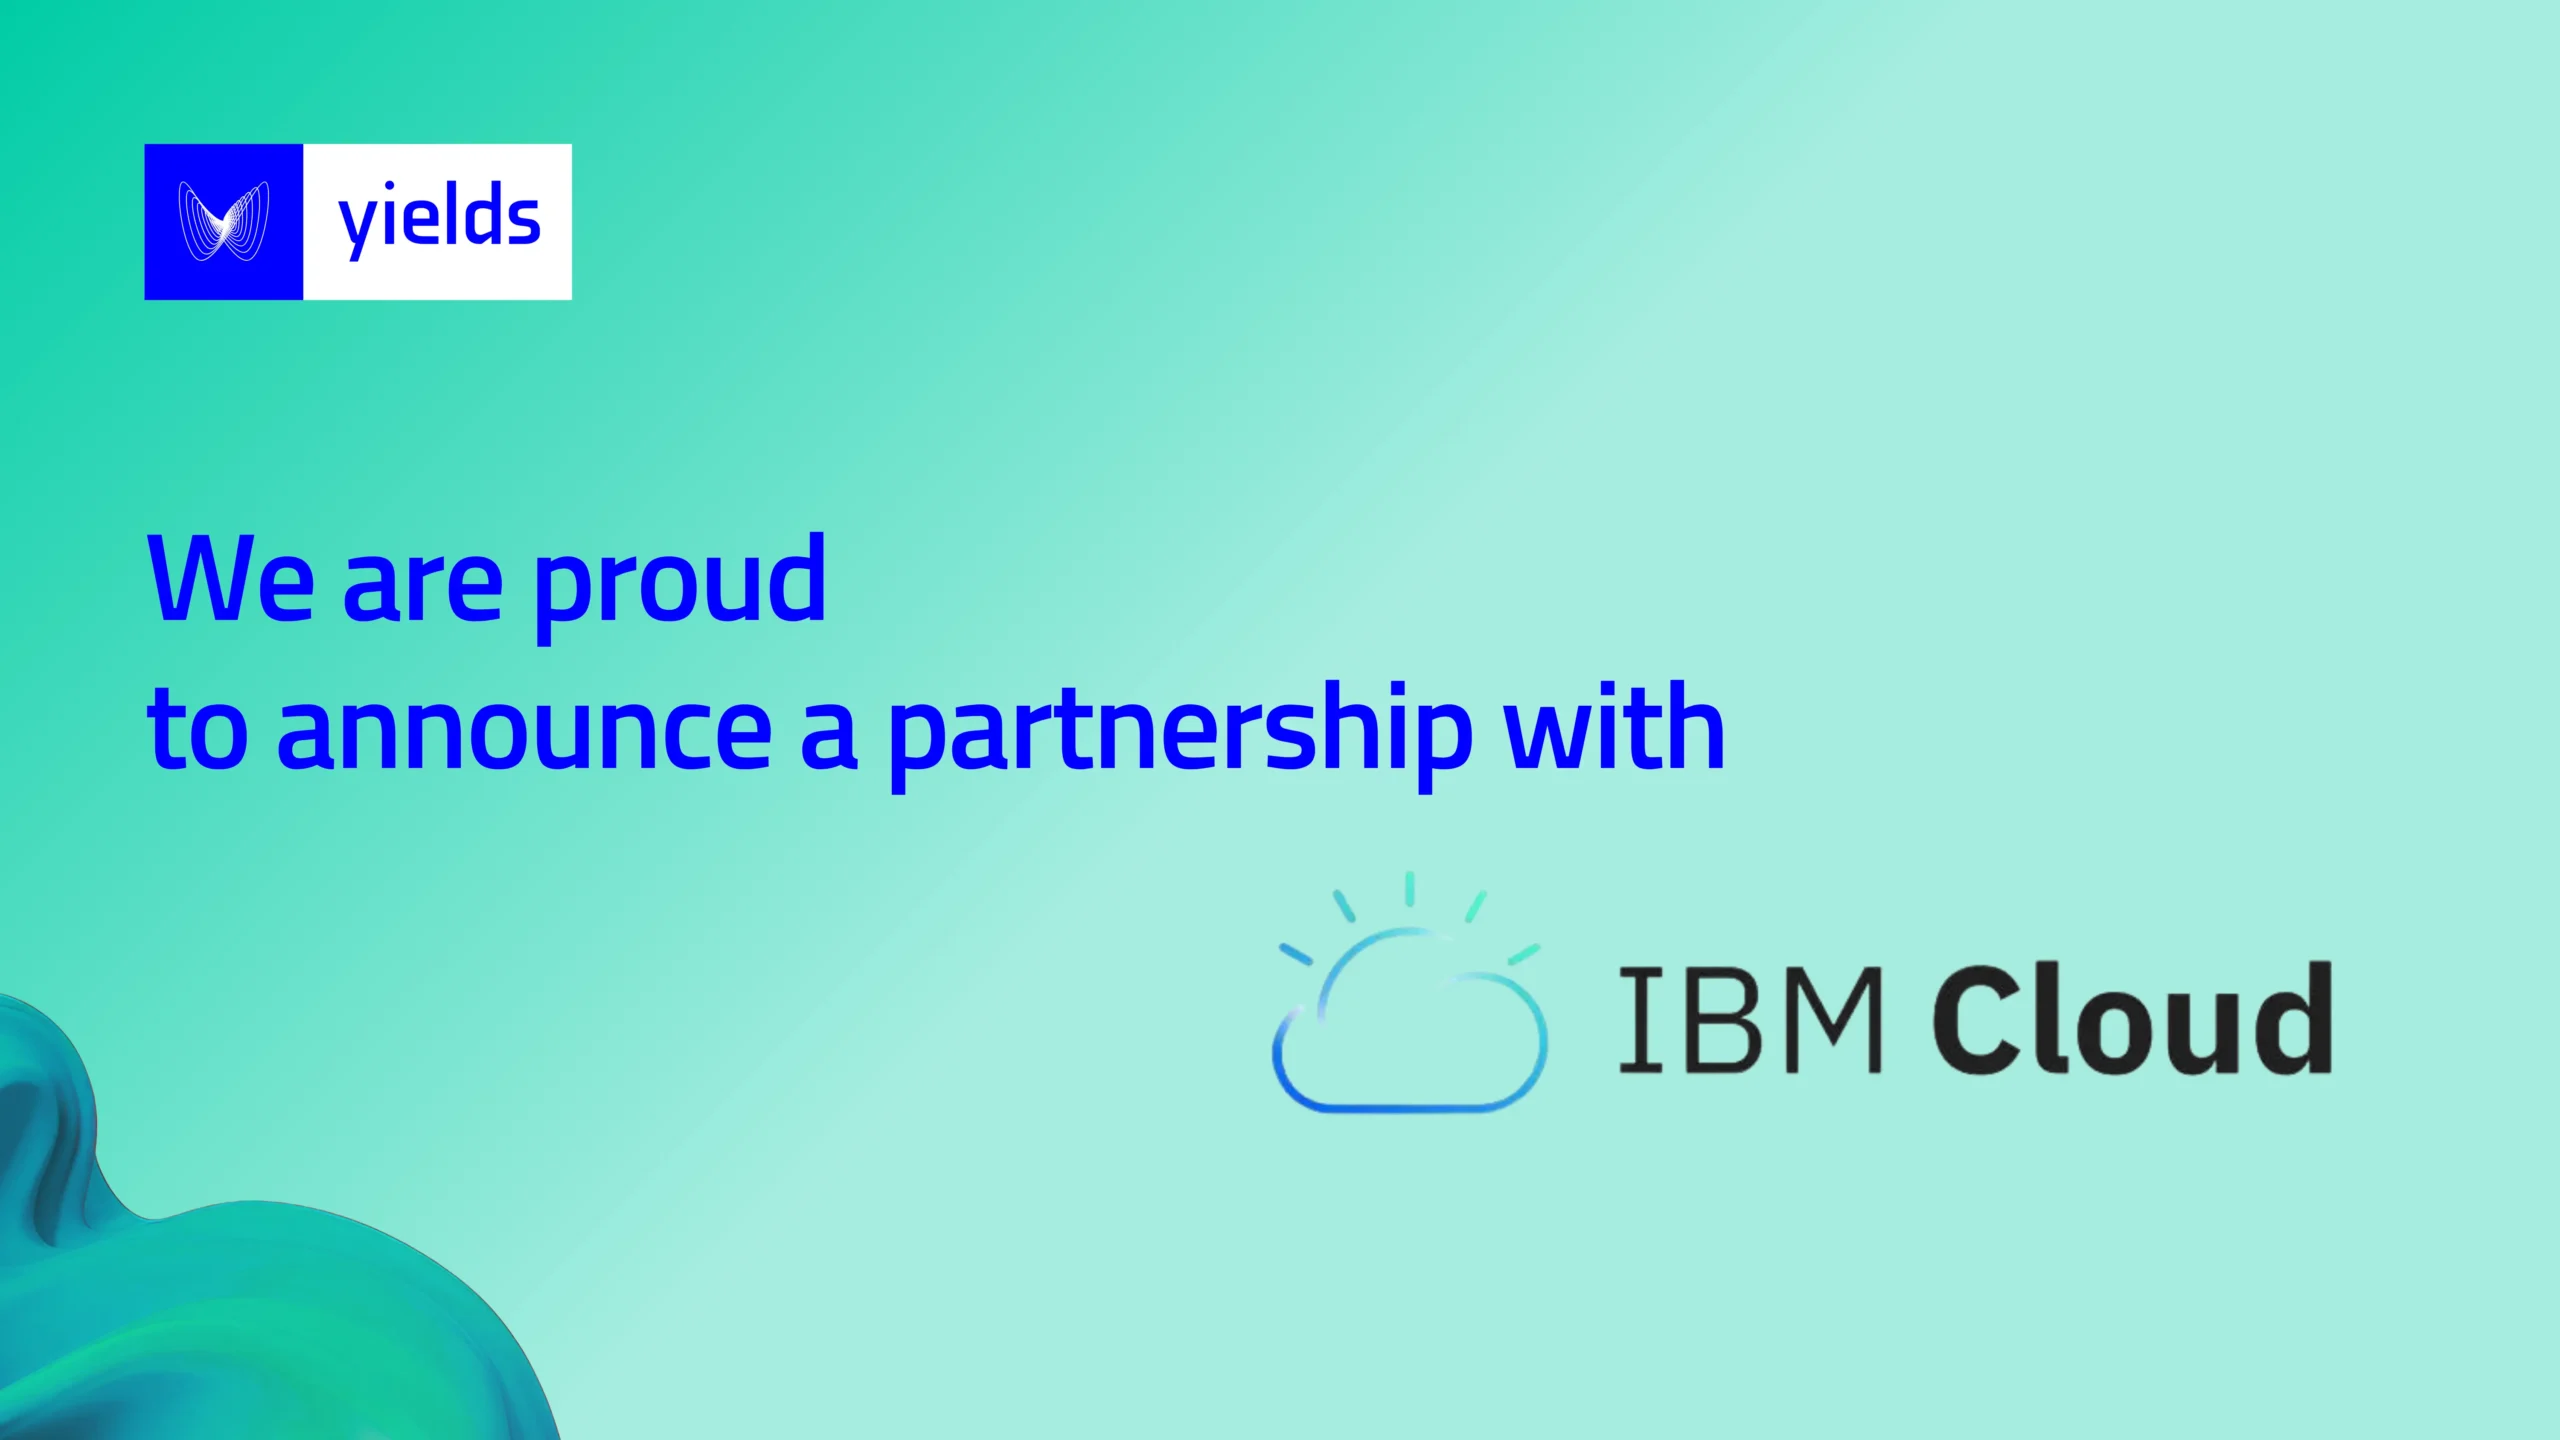 Chiron is now available on IBM Cloud for Financial Services